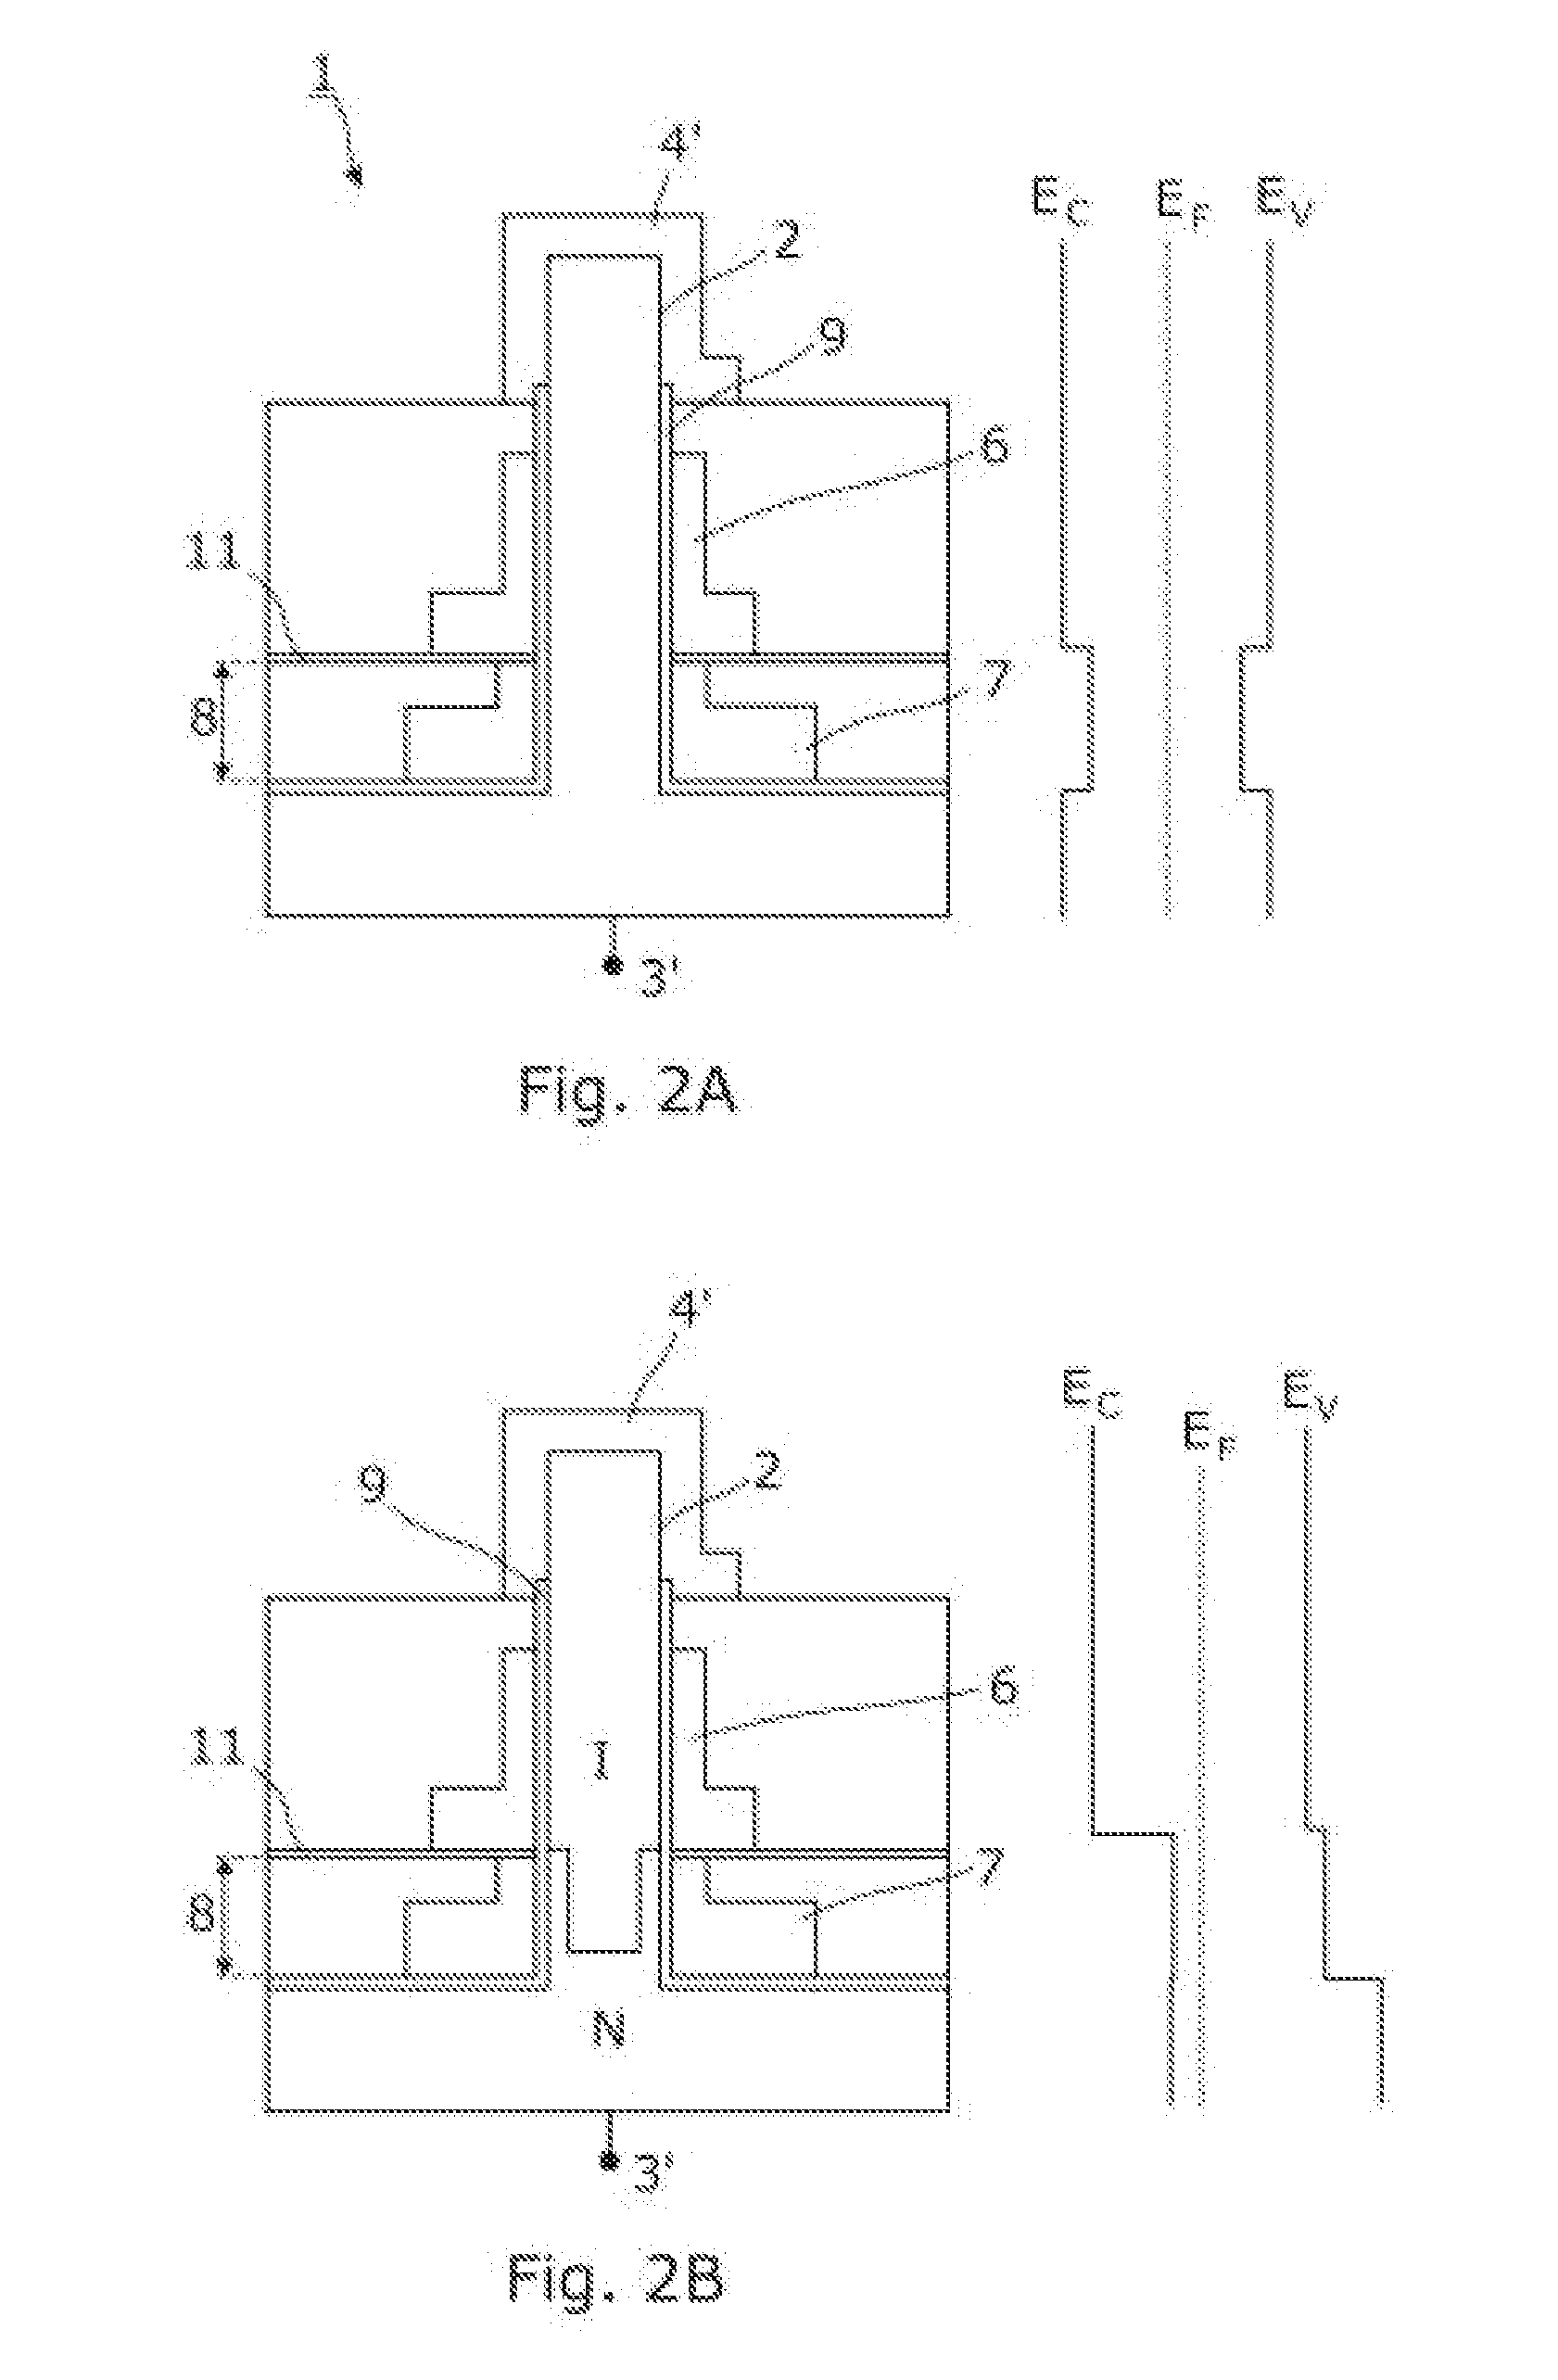 Nanowire field-effect device with multiple gates